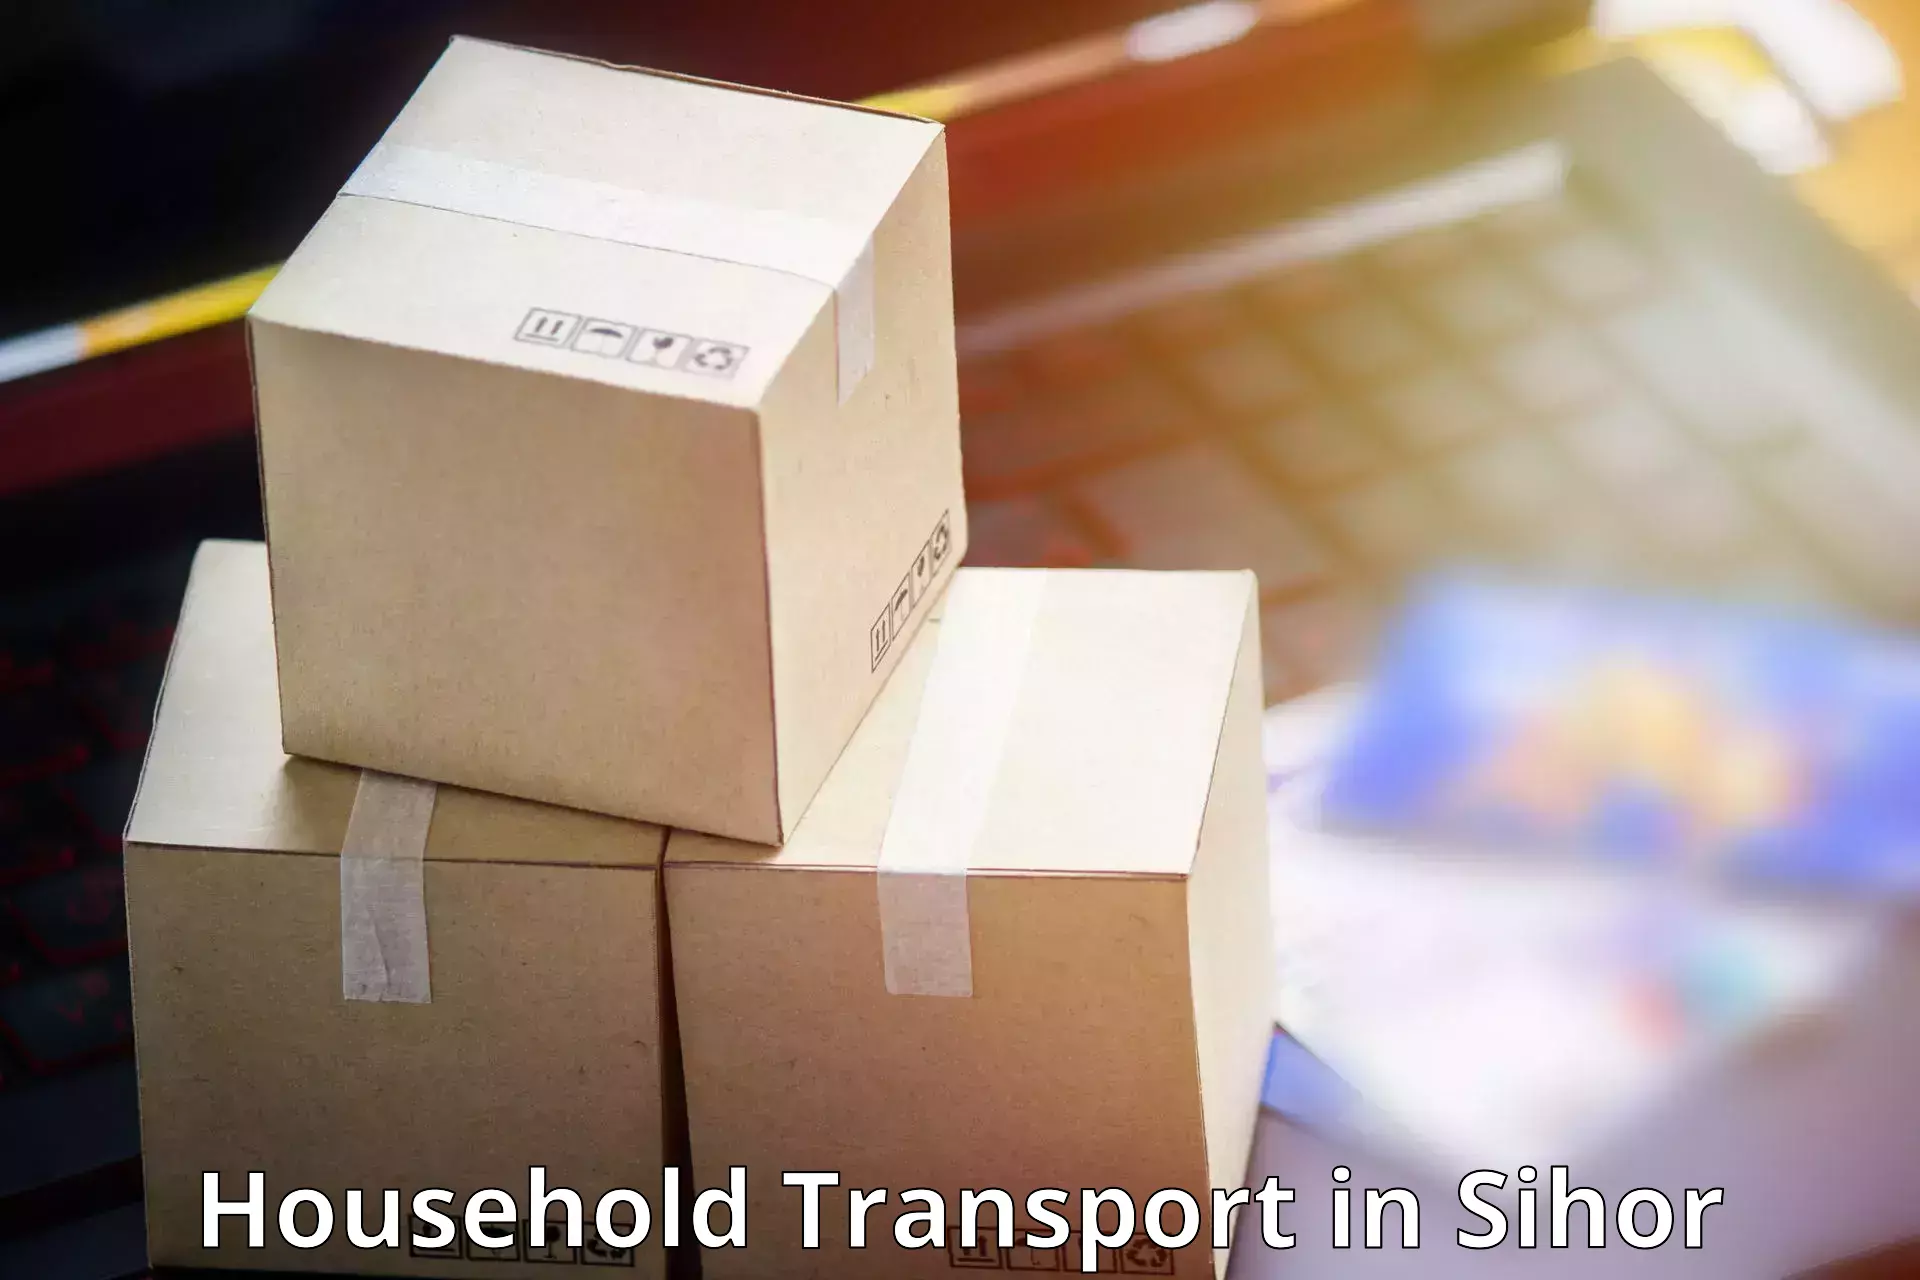 Furniture transport and storage in Sihor